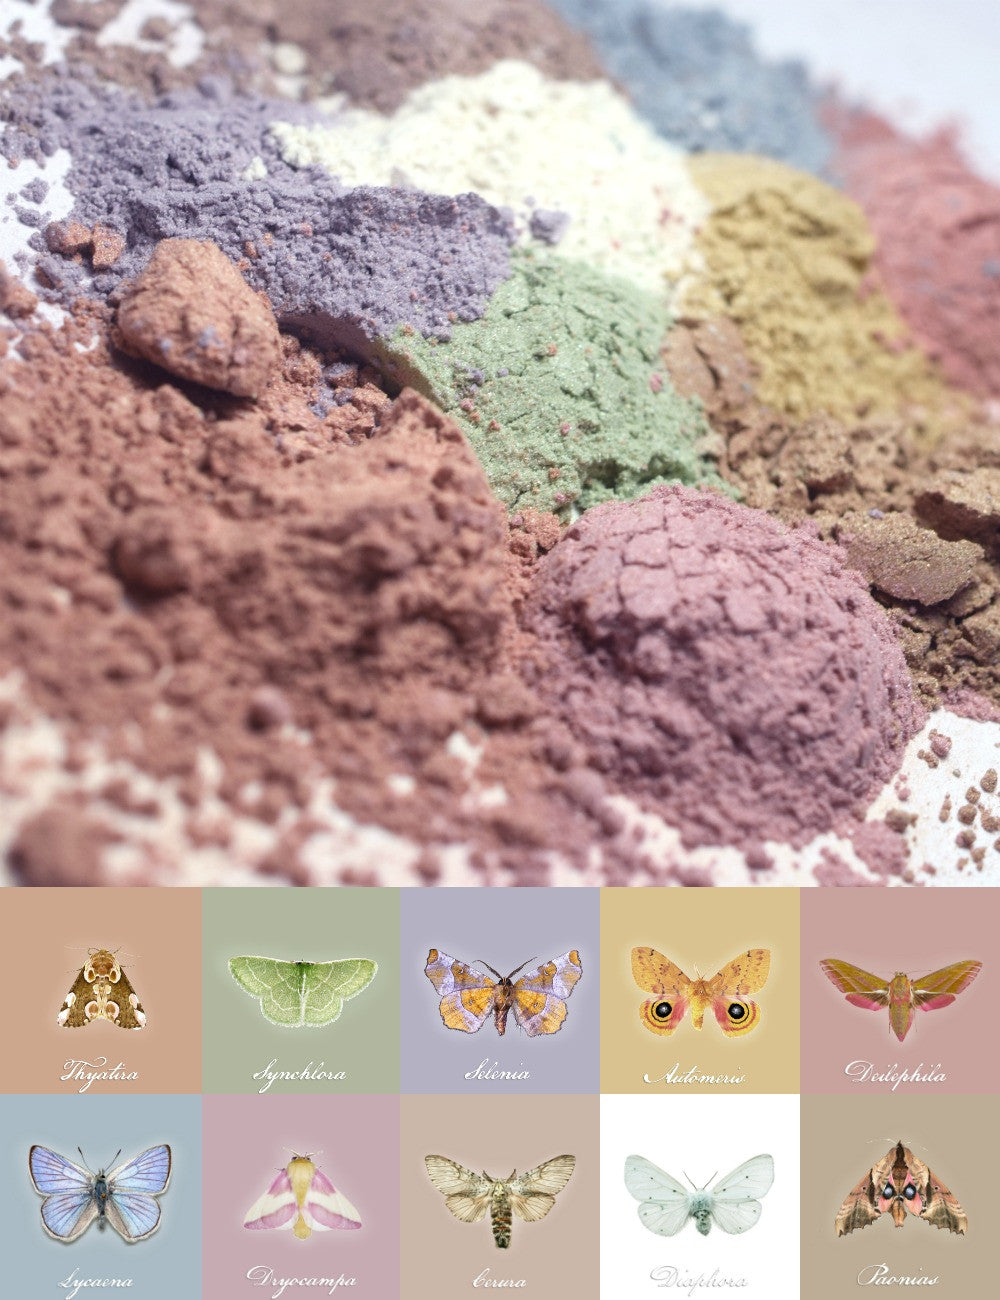 Coming Soon! The Insectarium Multipurpose Lustre Powders inspired by beautiful moths